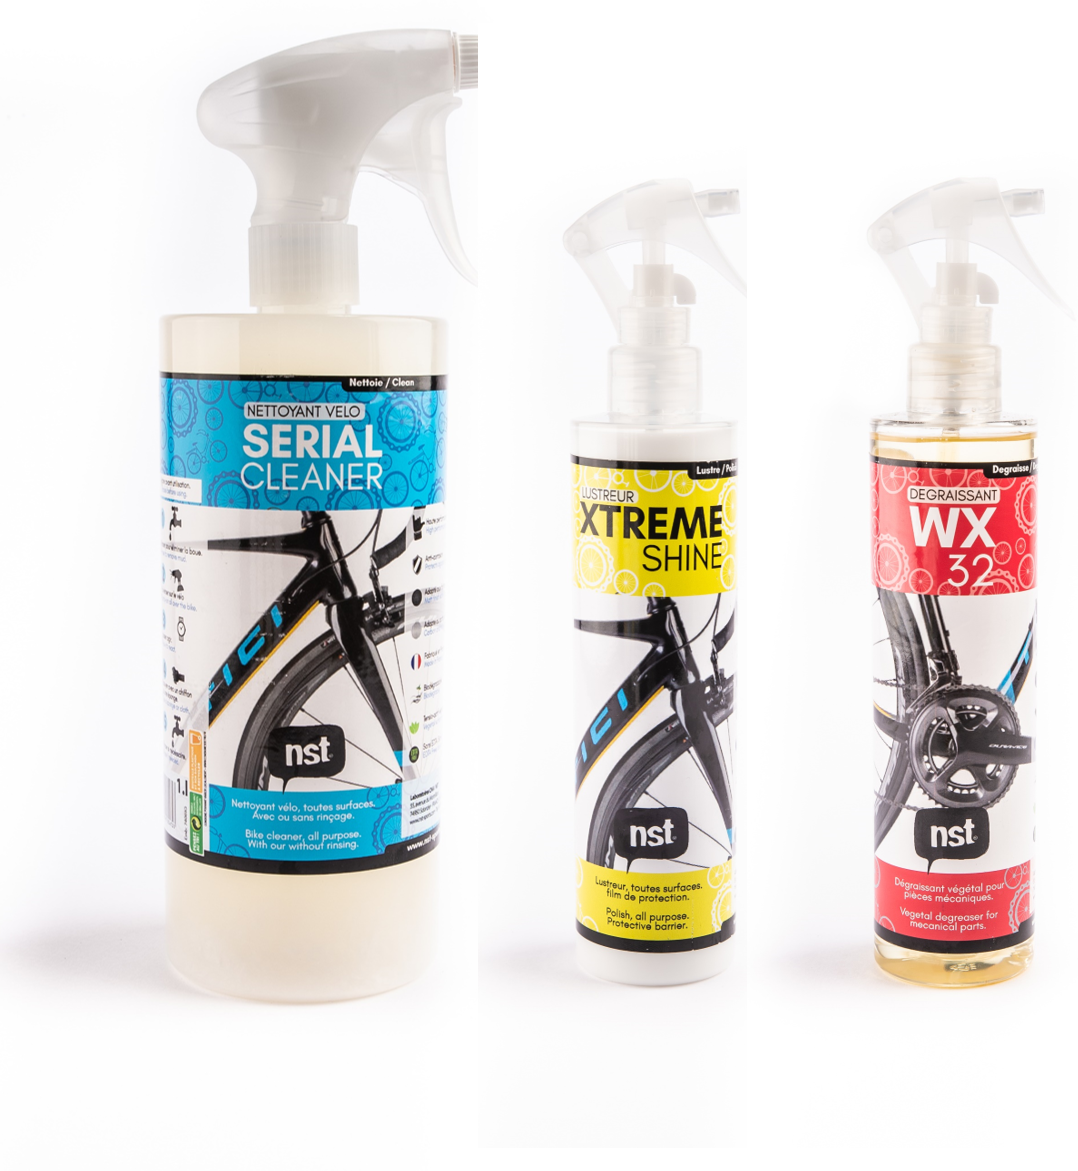 NST Serial Cleaner + WX32 + Xtreme Shine - Bike cleaning kit